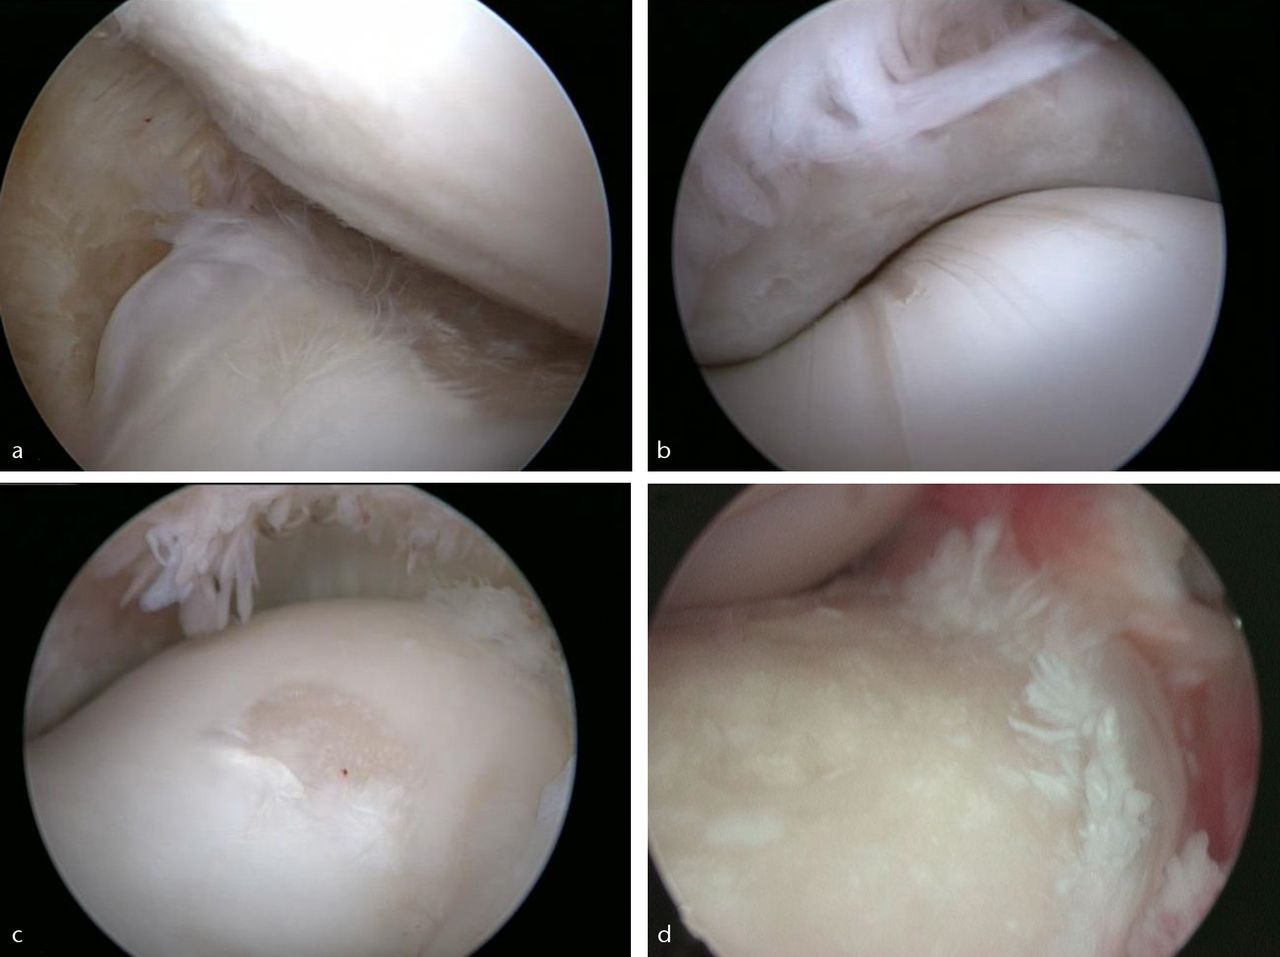 Fig. 4 
          Arthroscopic images of a) the medial
aspect of middle carpal joint, showing erosion of articular cartilage
and osteophytosis on radial carpal bone, and minor cartilaginous
disease on the opposing surface of the third carpal bone, b) the
metacarpophalangeal joint, showing wear line formations signifying early
osteoarthritis on the distal metacarpus, c) the metacarpophalangeal
joint, showing focal cartilage erosion on the medial condyle of the
distal metacarpus, and d) the middle carpal joint, showing severe
erosion of articular cartilage on the distal radial carpal bone.
        